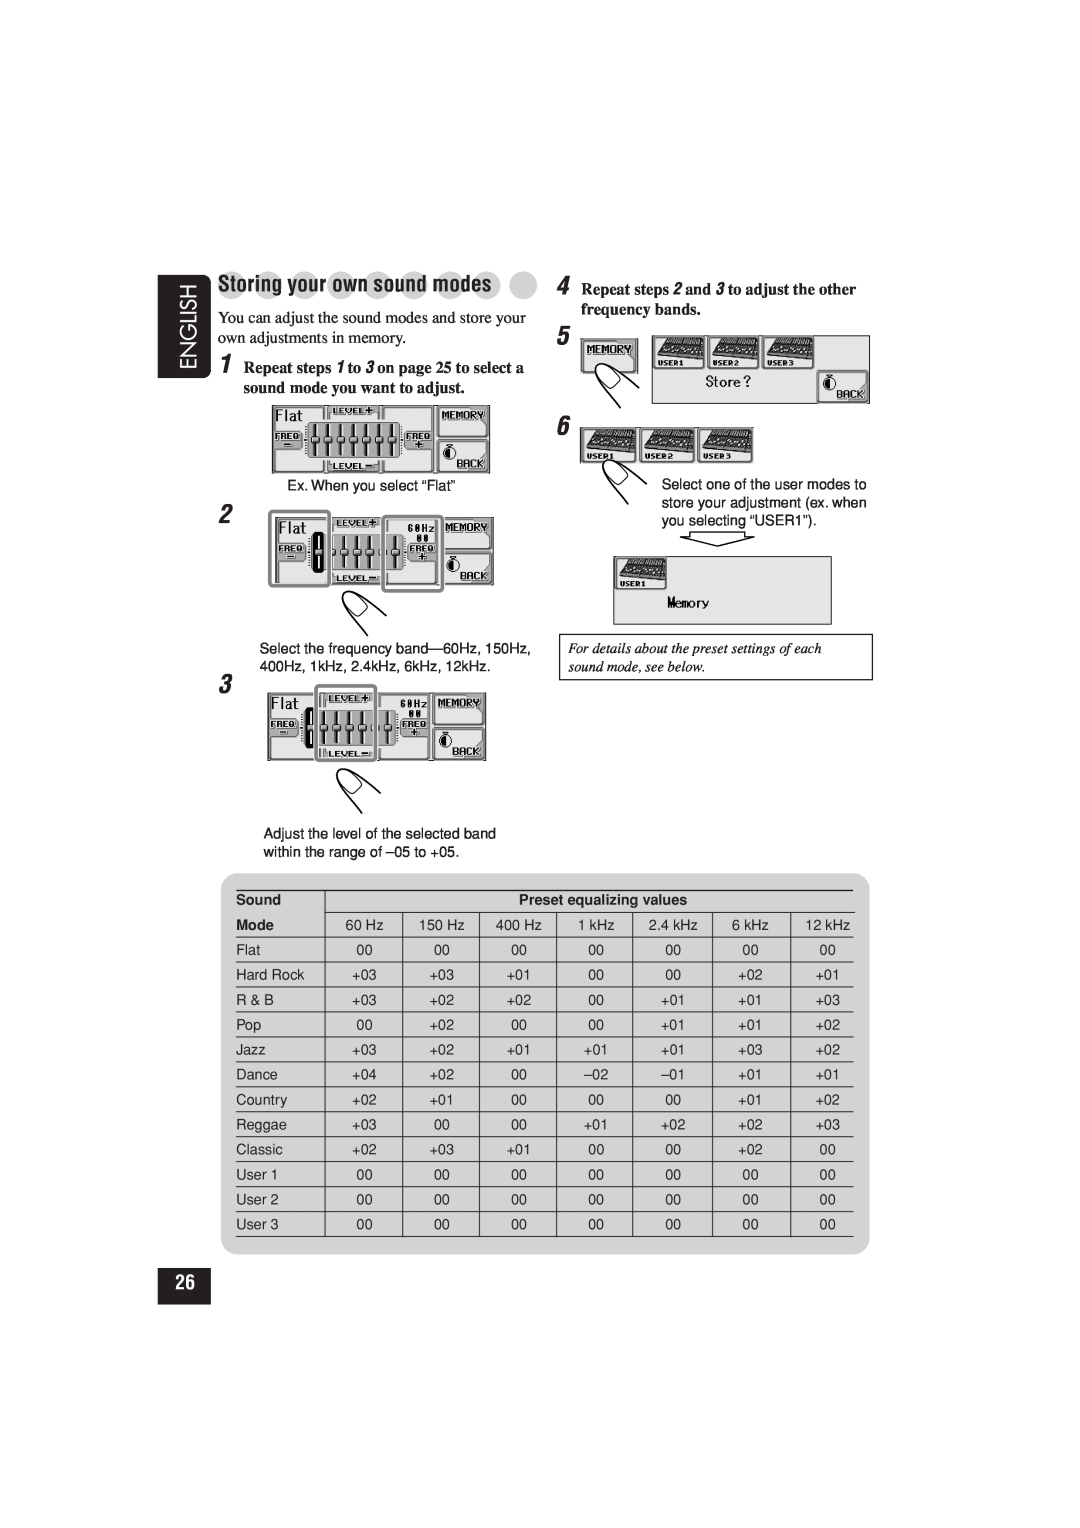 JVC KD-LHX502, KD-LHX501 manual Storing your own sound modes, English, You can adjust the sound modes and store your 